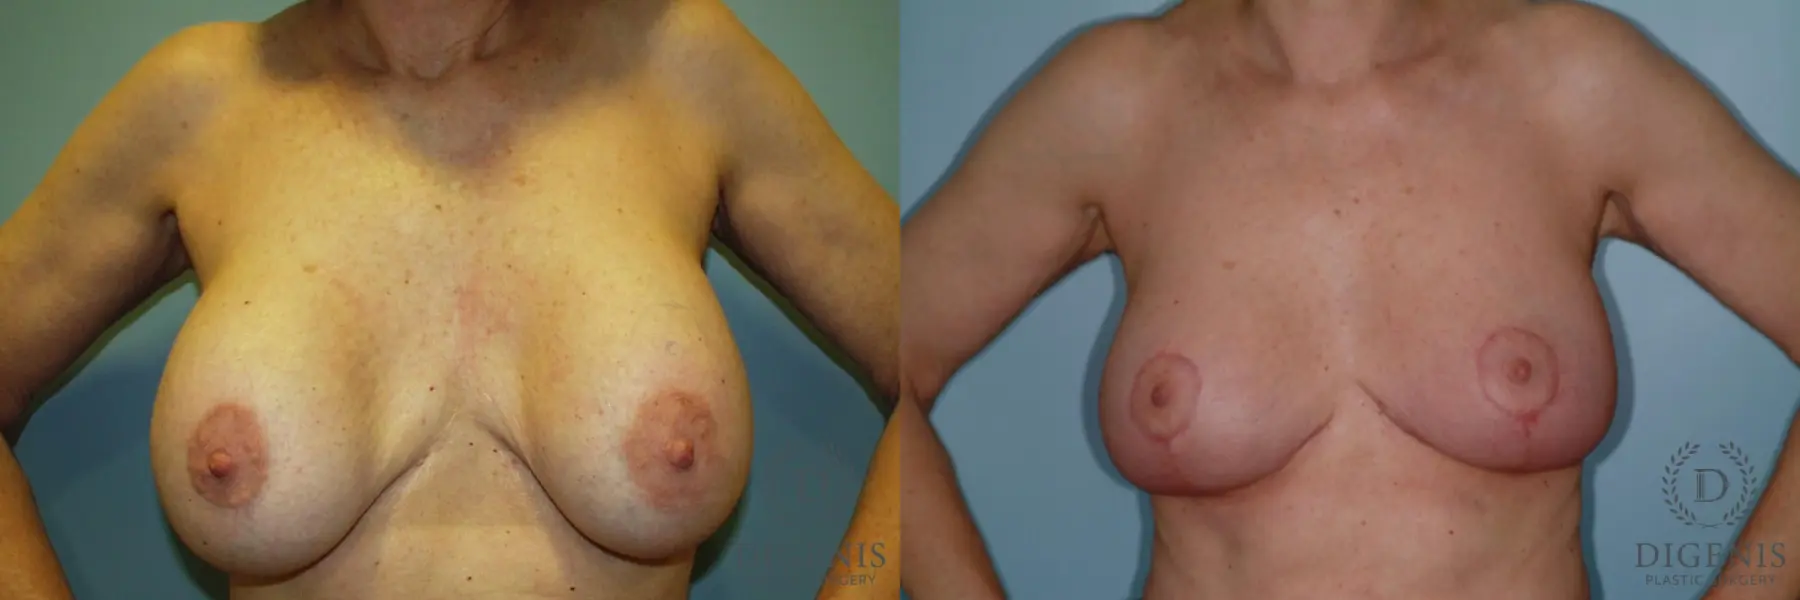 Breast Lift With Implants: Patient 6 - Before and After 1